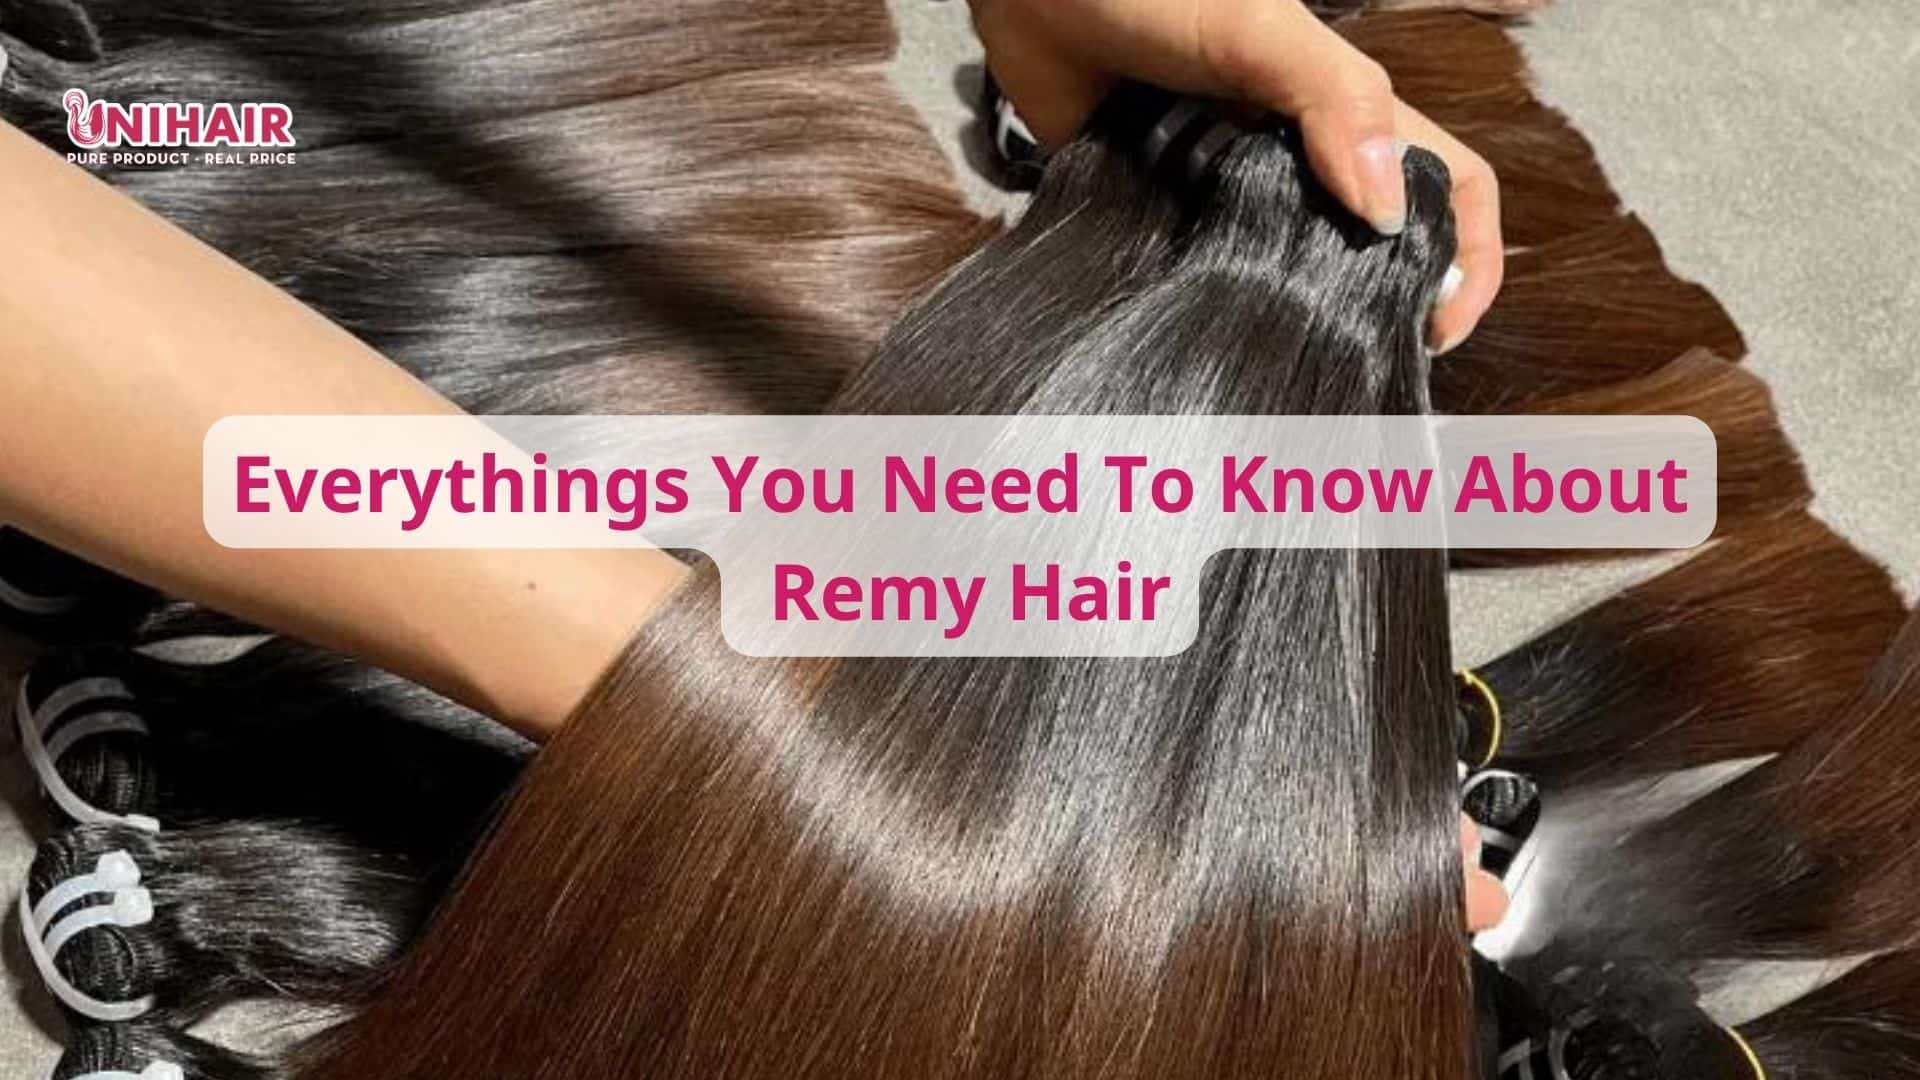 101 Things You Need To Know About Remy Hair